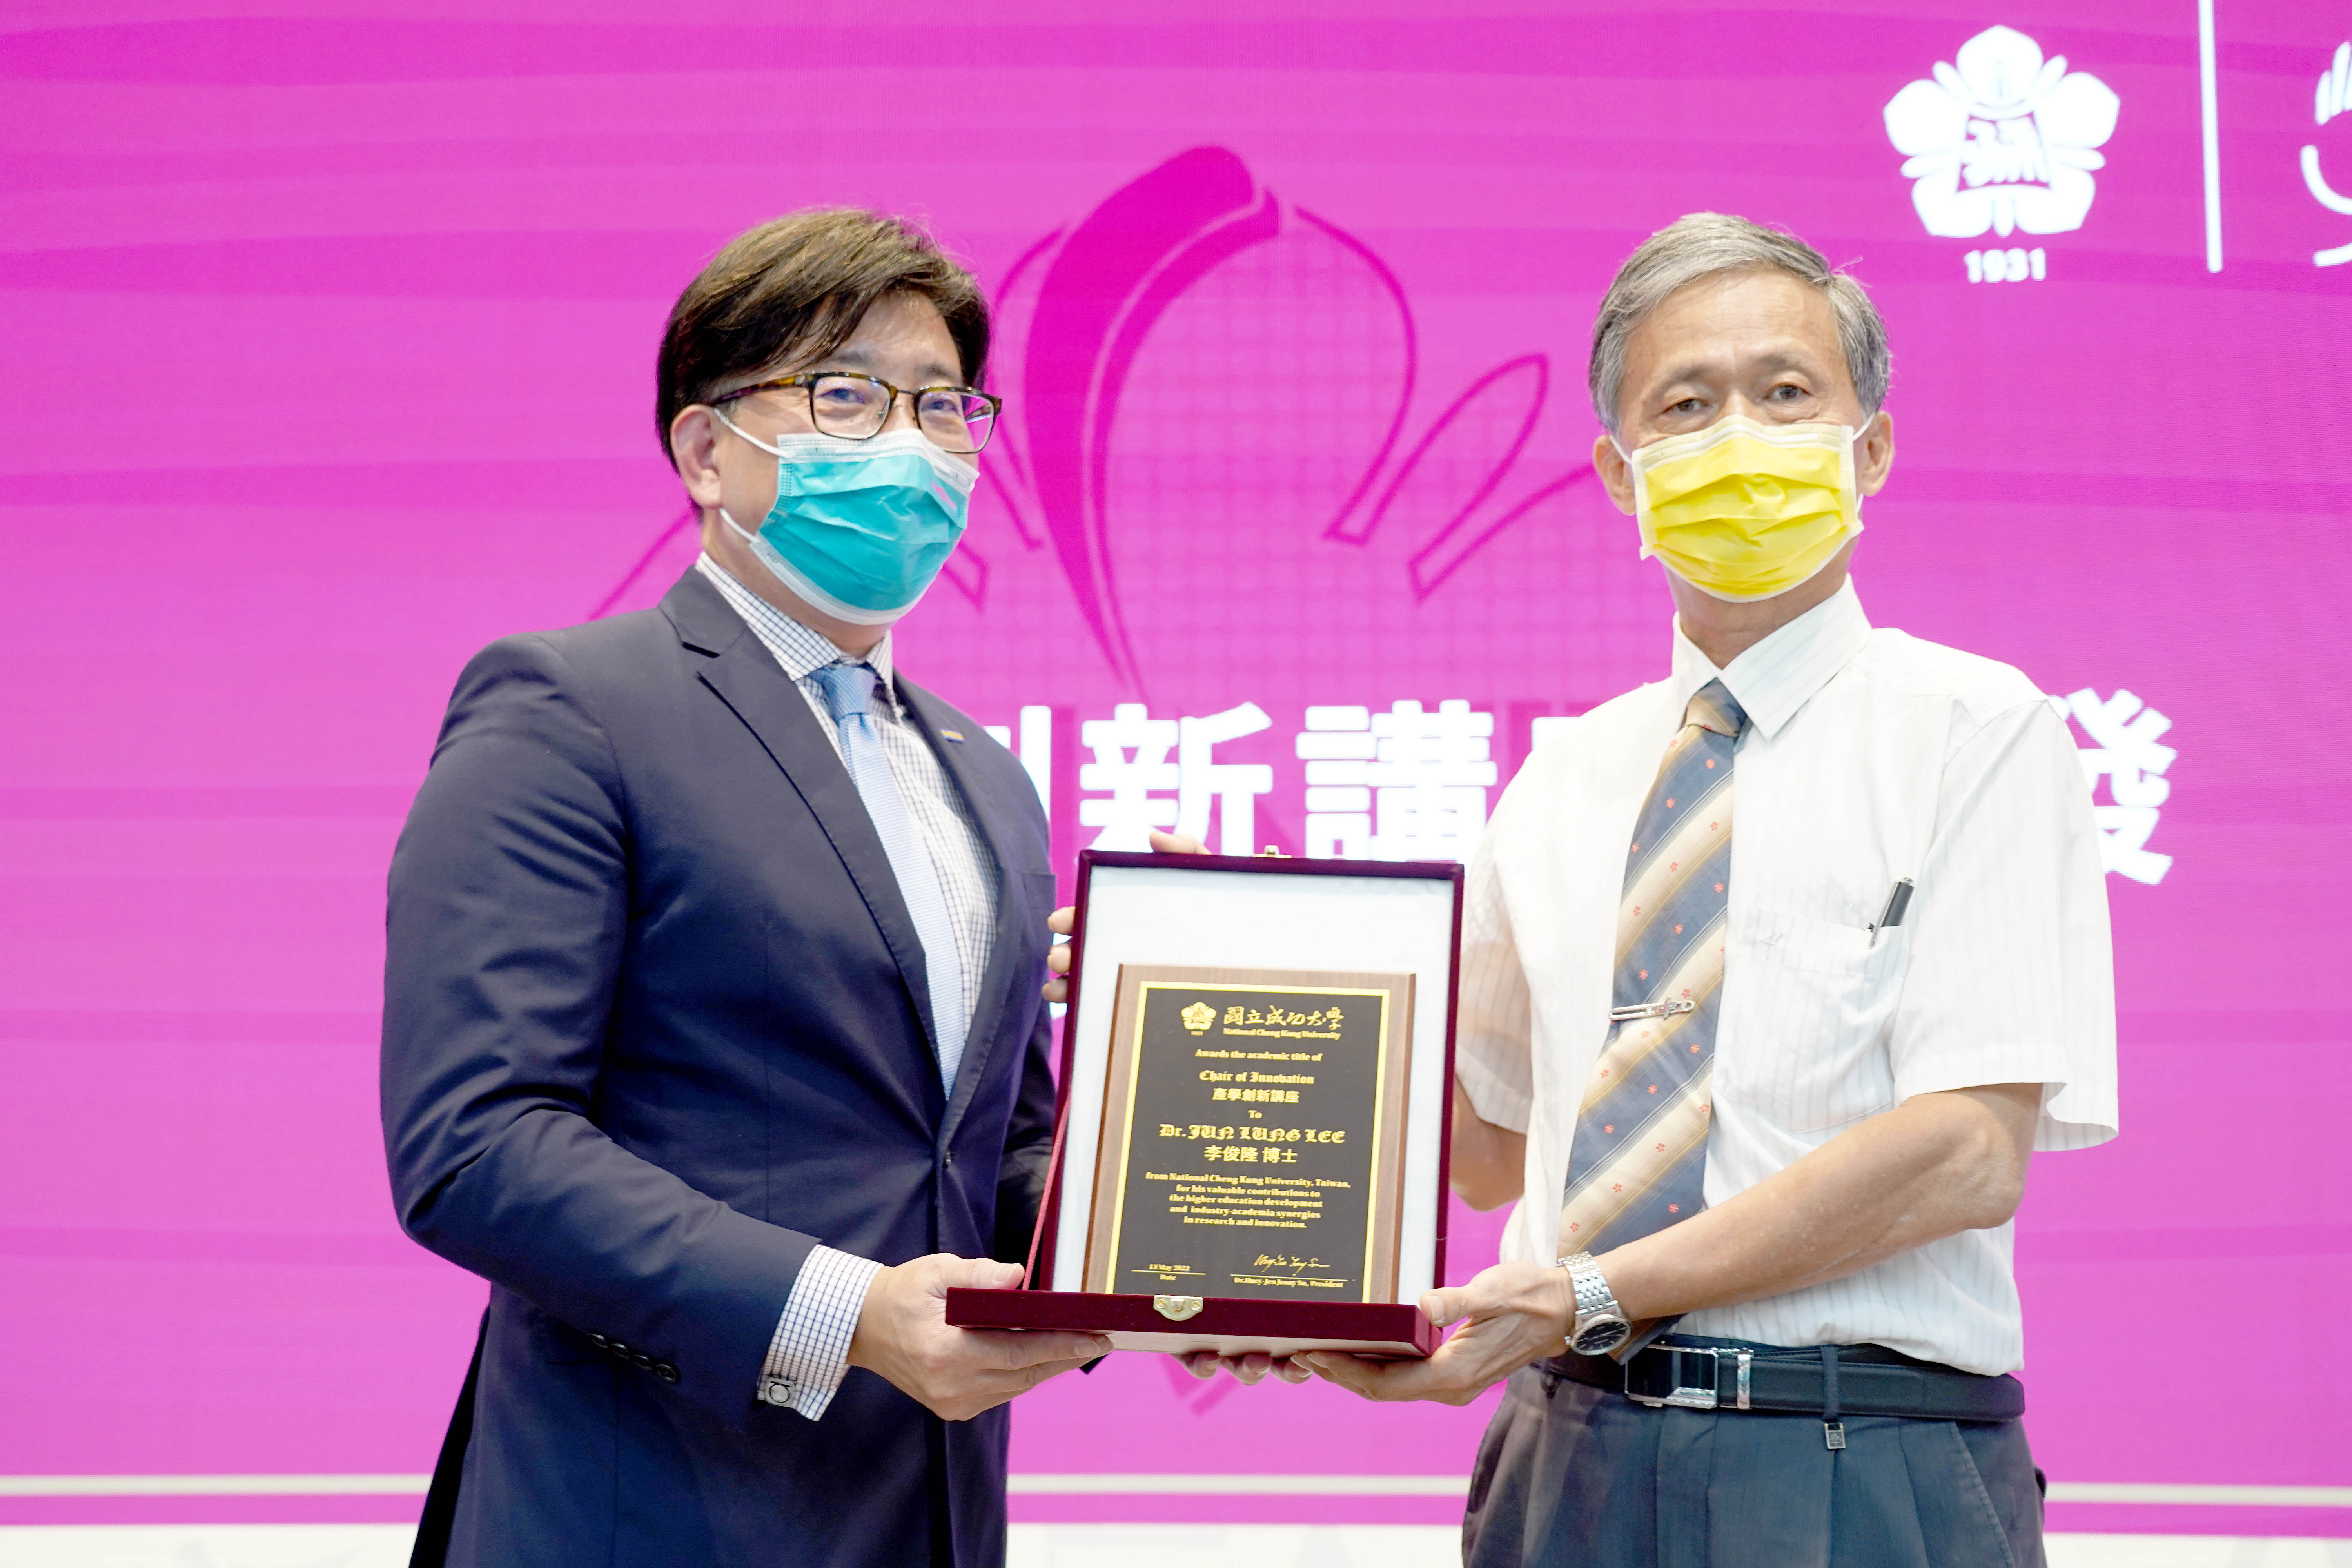 Wei-Chou Hsu, Associate Dean of the Academy, presented the recognition of ‘Chair of Industry and Academy Innovation’ to John Lee